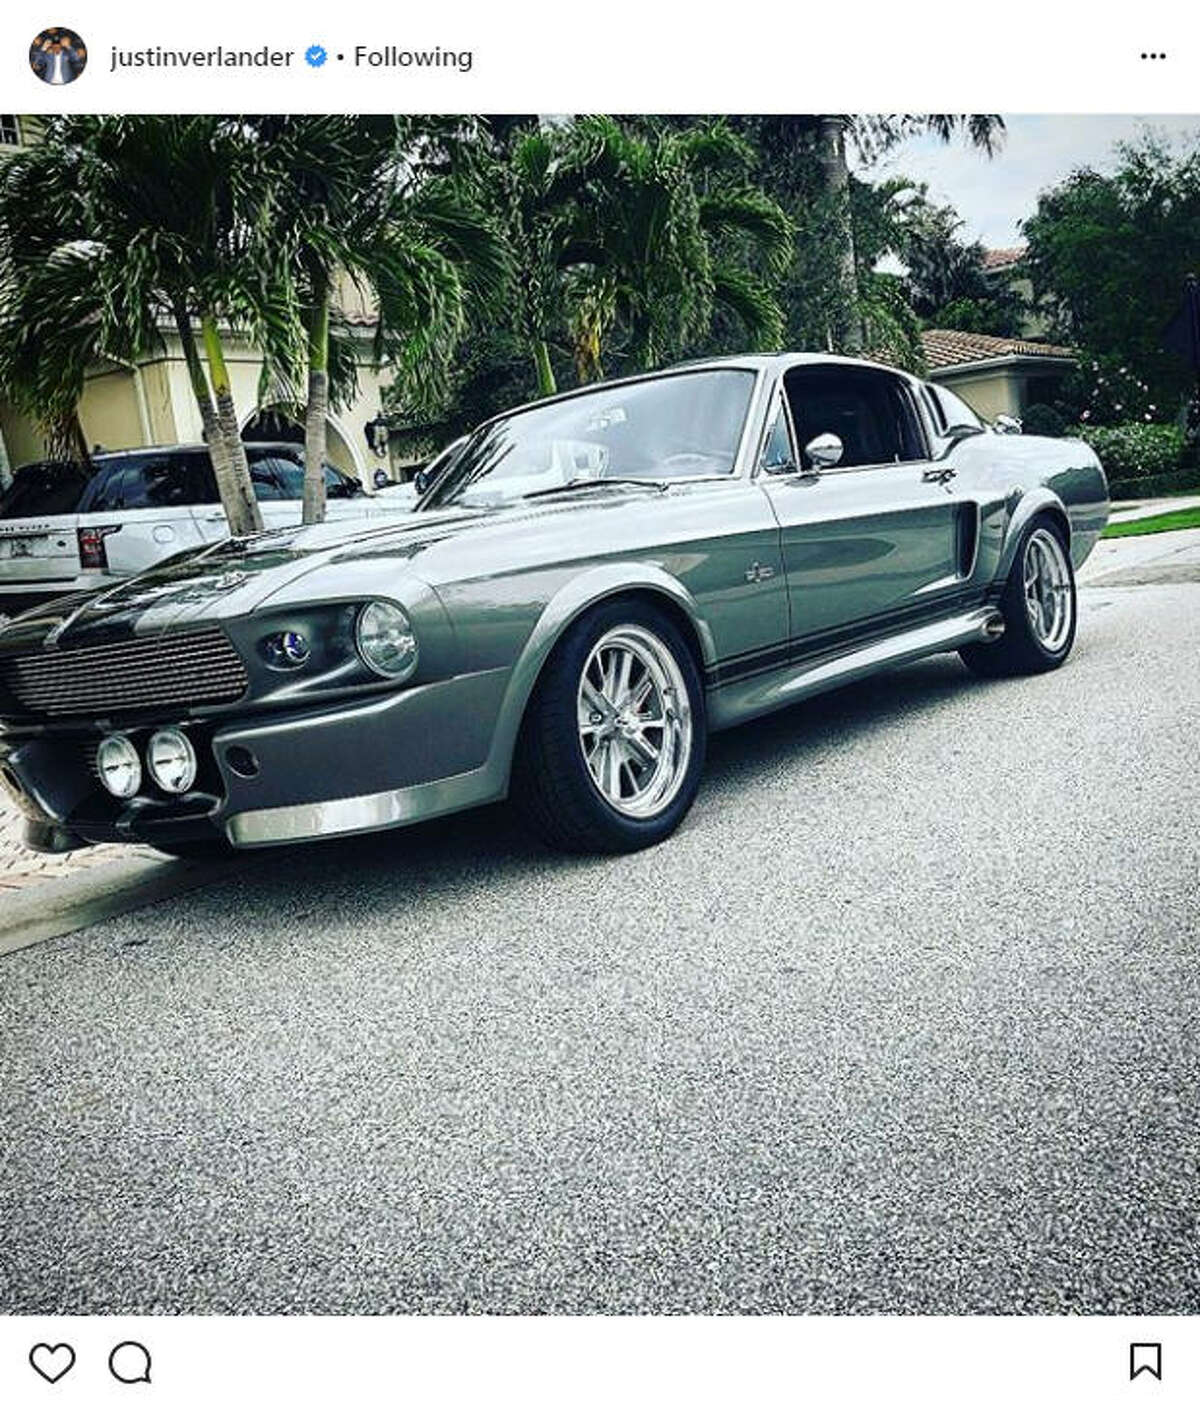 On Friday, Astros pitchers Justin Verlander showed off his new Eleanor Mustang on Instagram in a series of posts. Source: Instagram